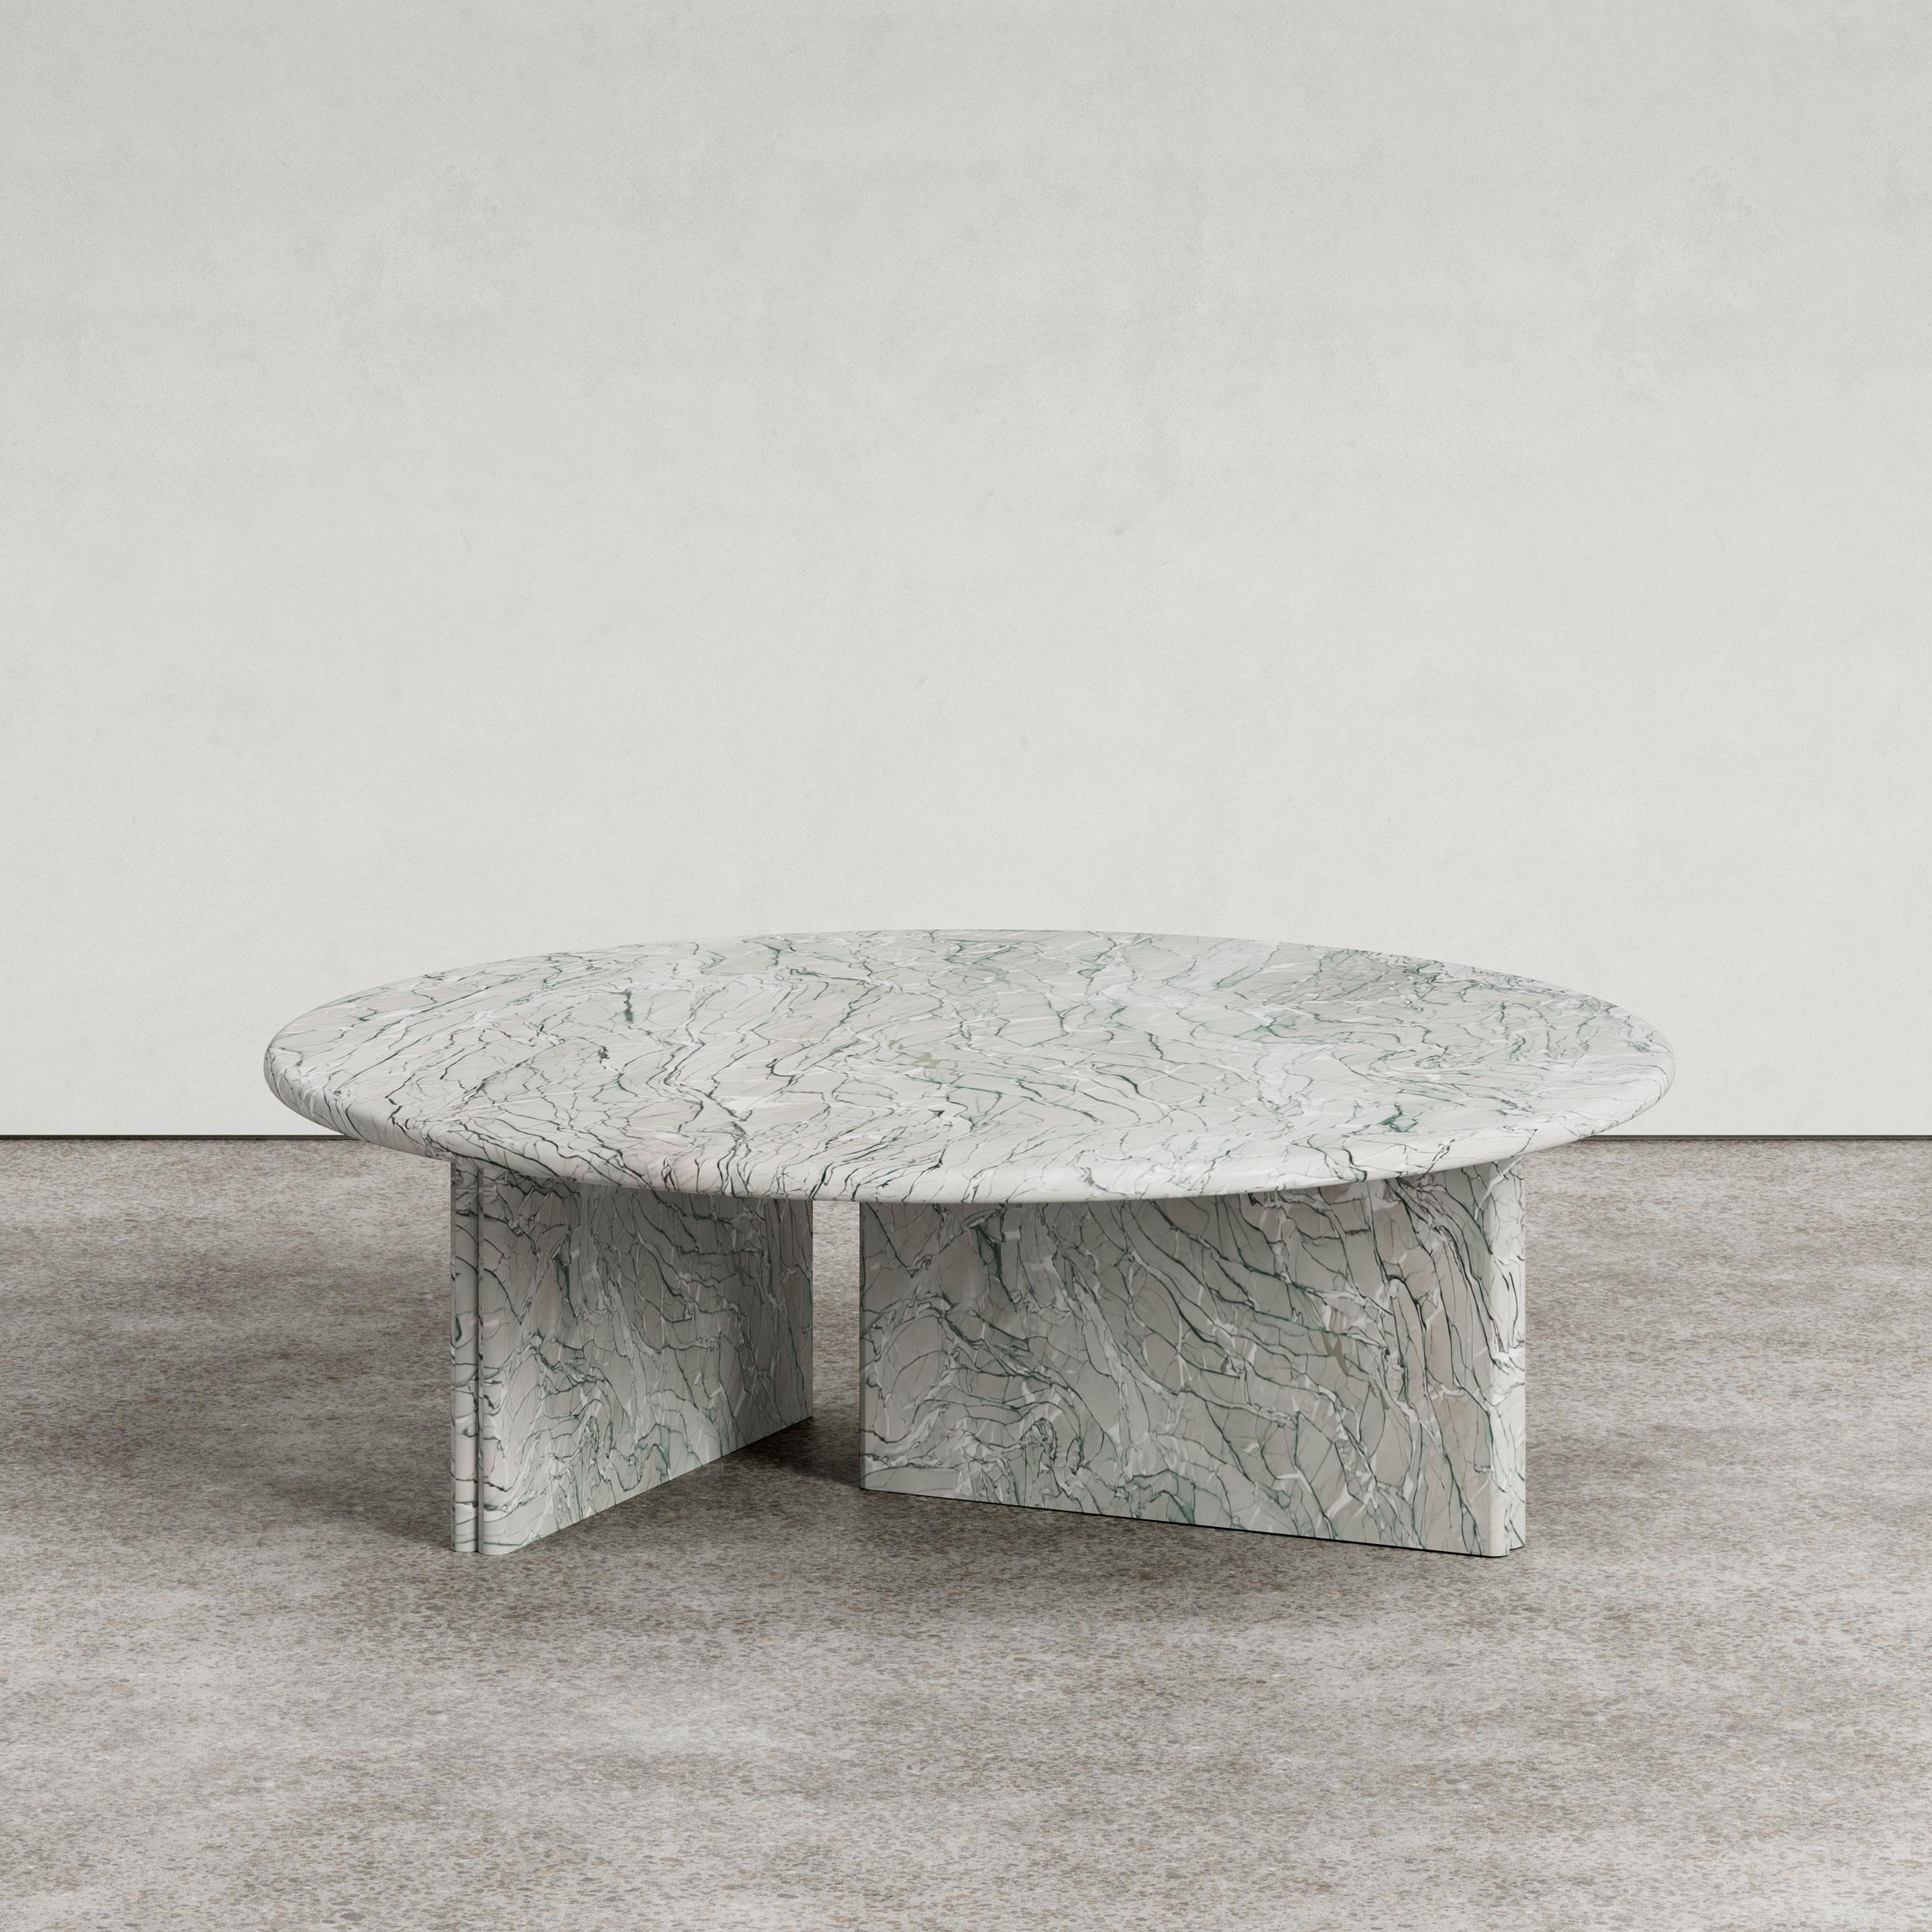 Onda Coffee Table in Verde Bianco designed by Just Adele. Made to order just for you locally in Melbourne. 

The Onda Coffee Table is characterised by its soft forms and bold stone finishes. Translating to “wave” in Italian, the name Onda takes its